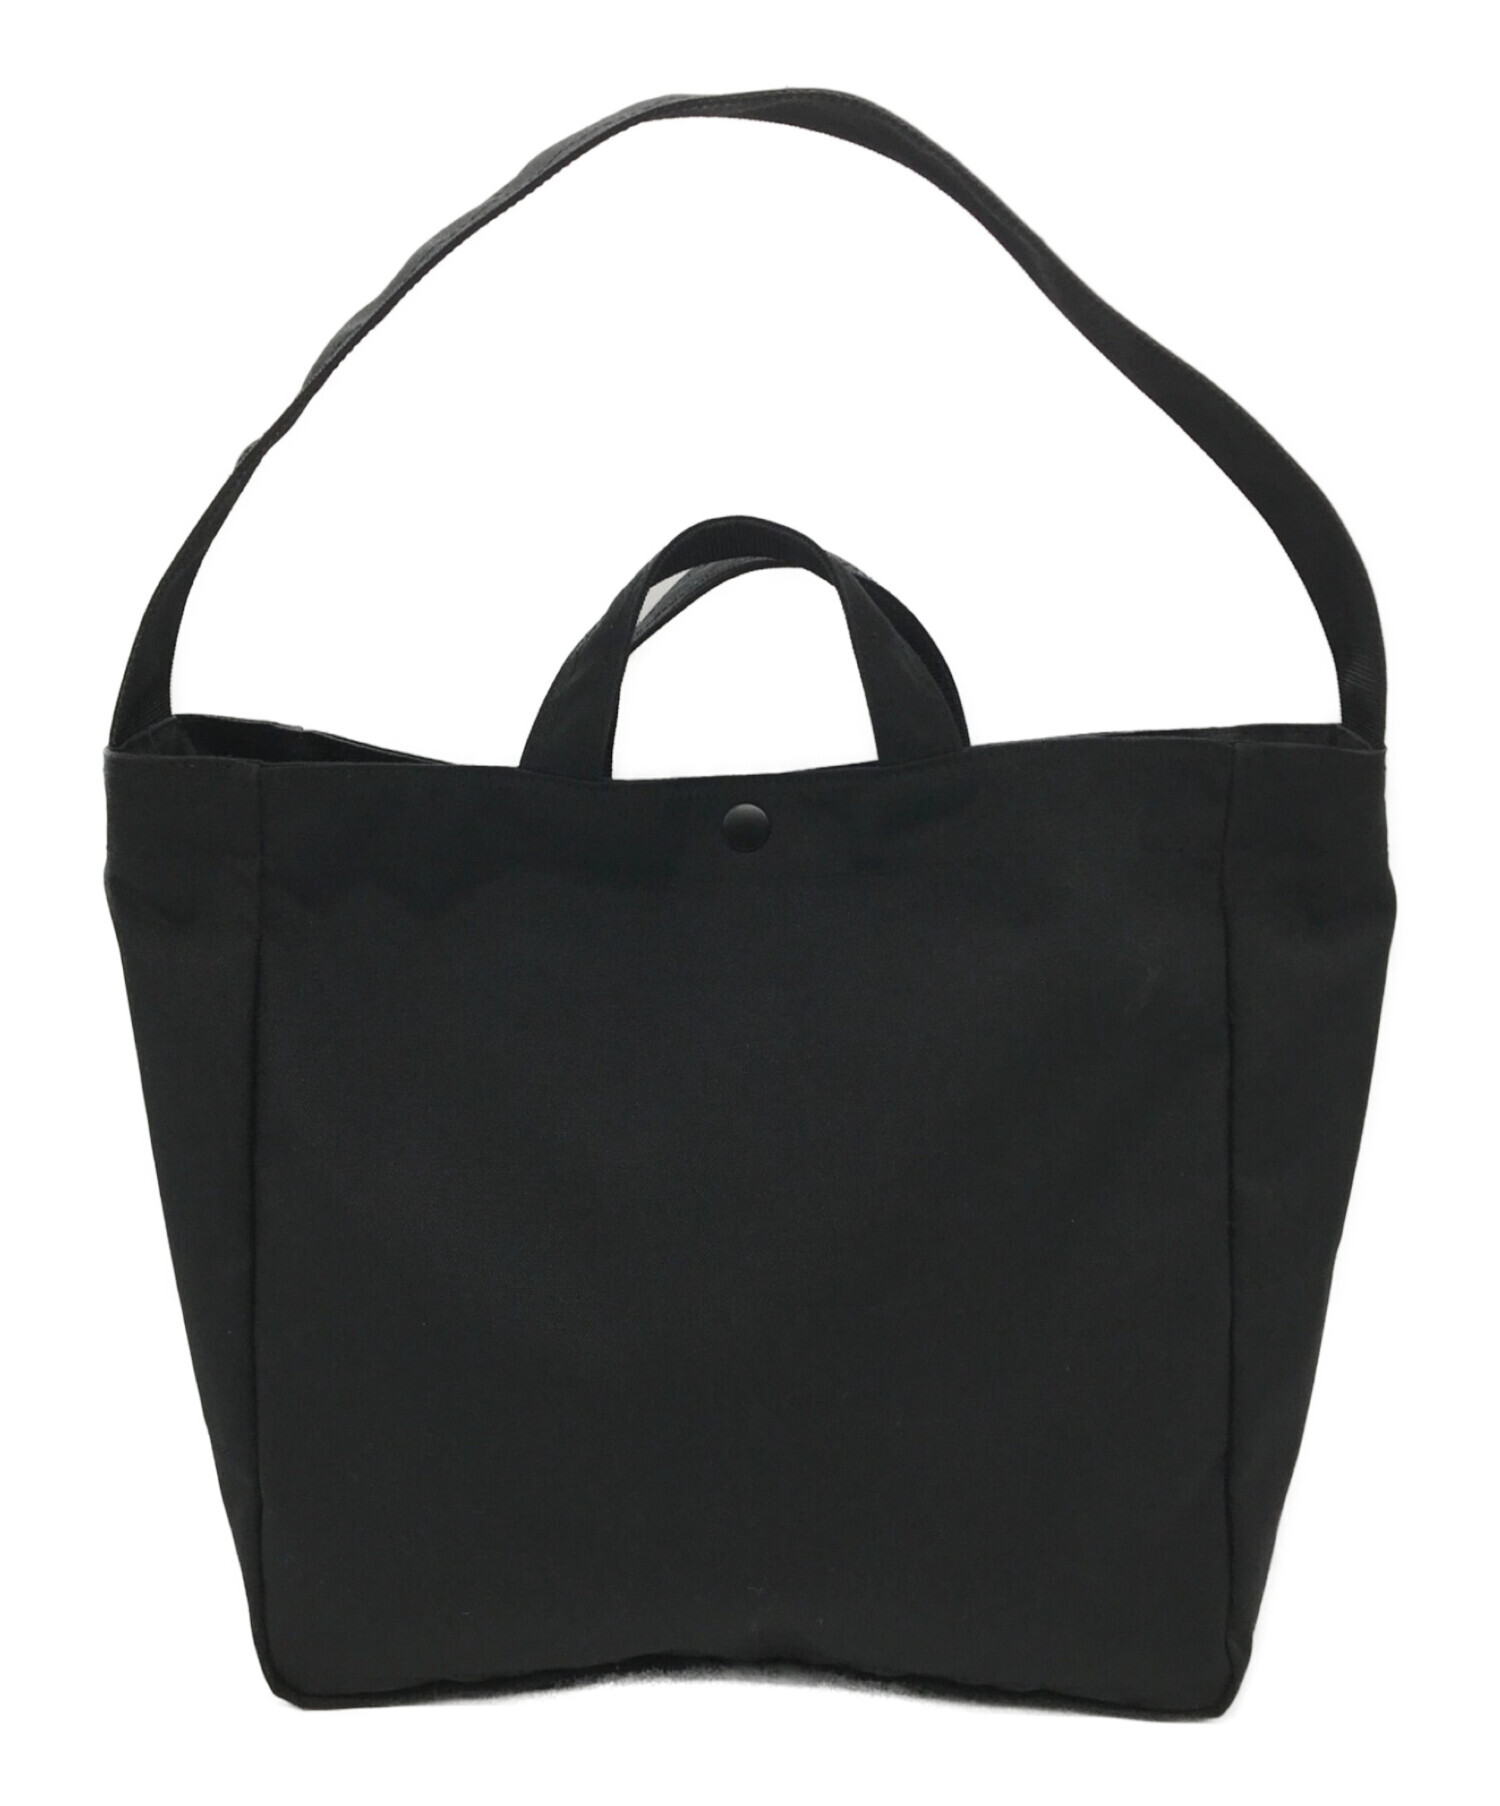 comme x porter 2 way tote bag ポーター　新品未使用